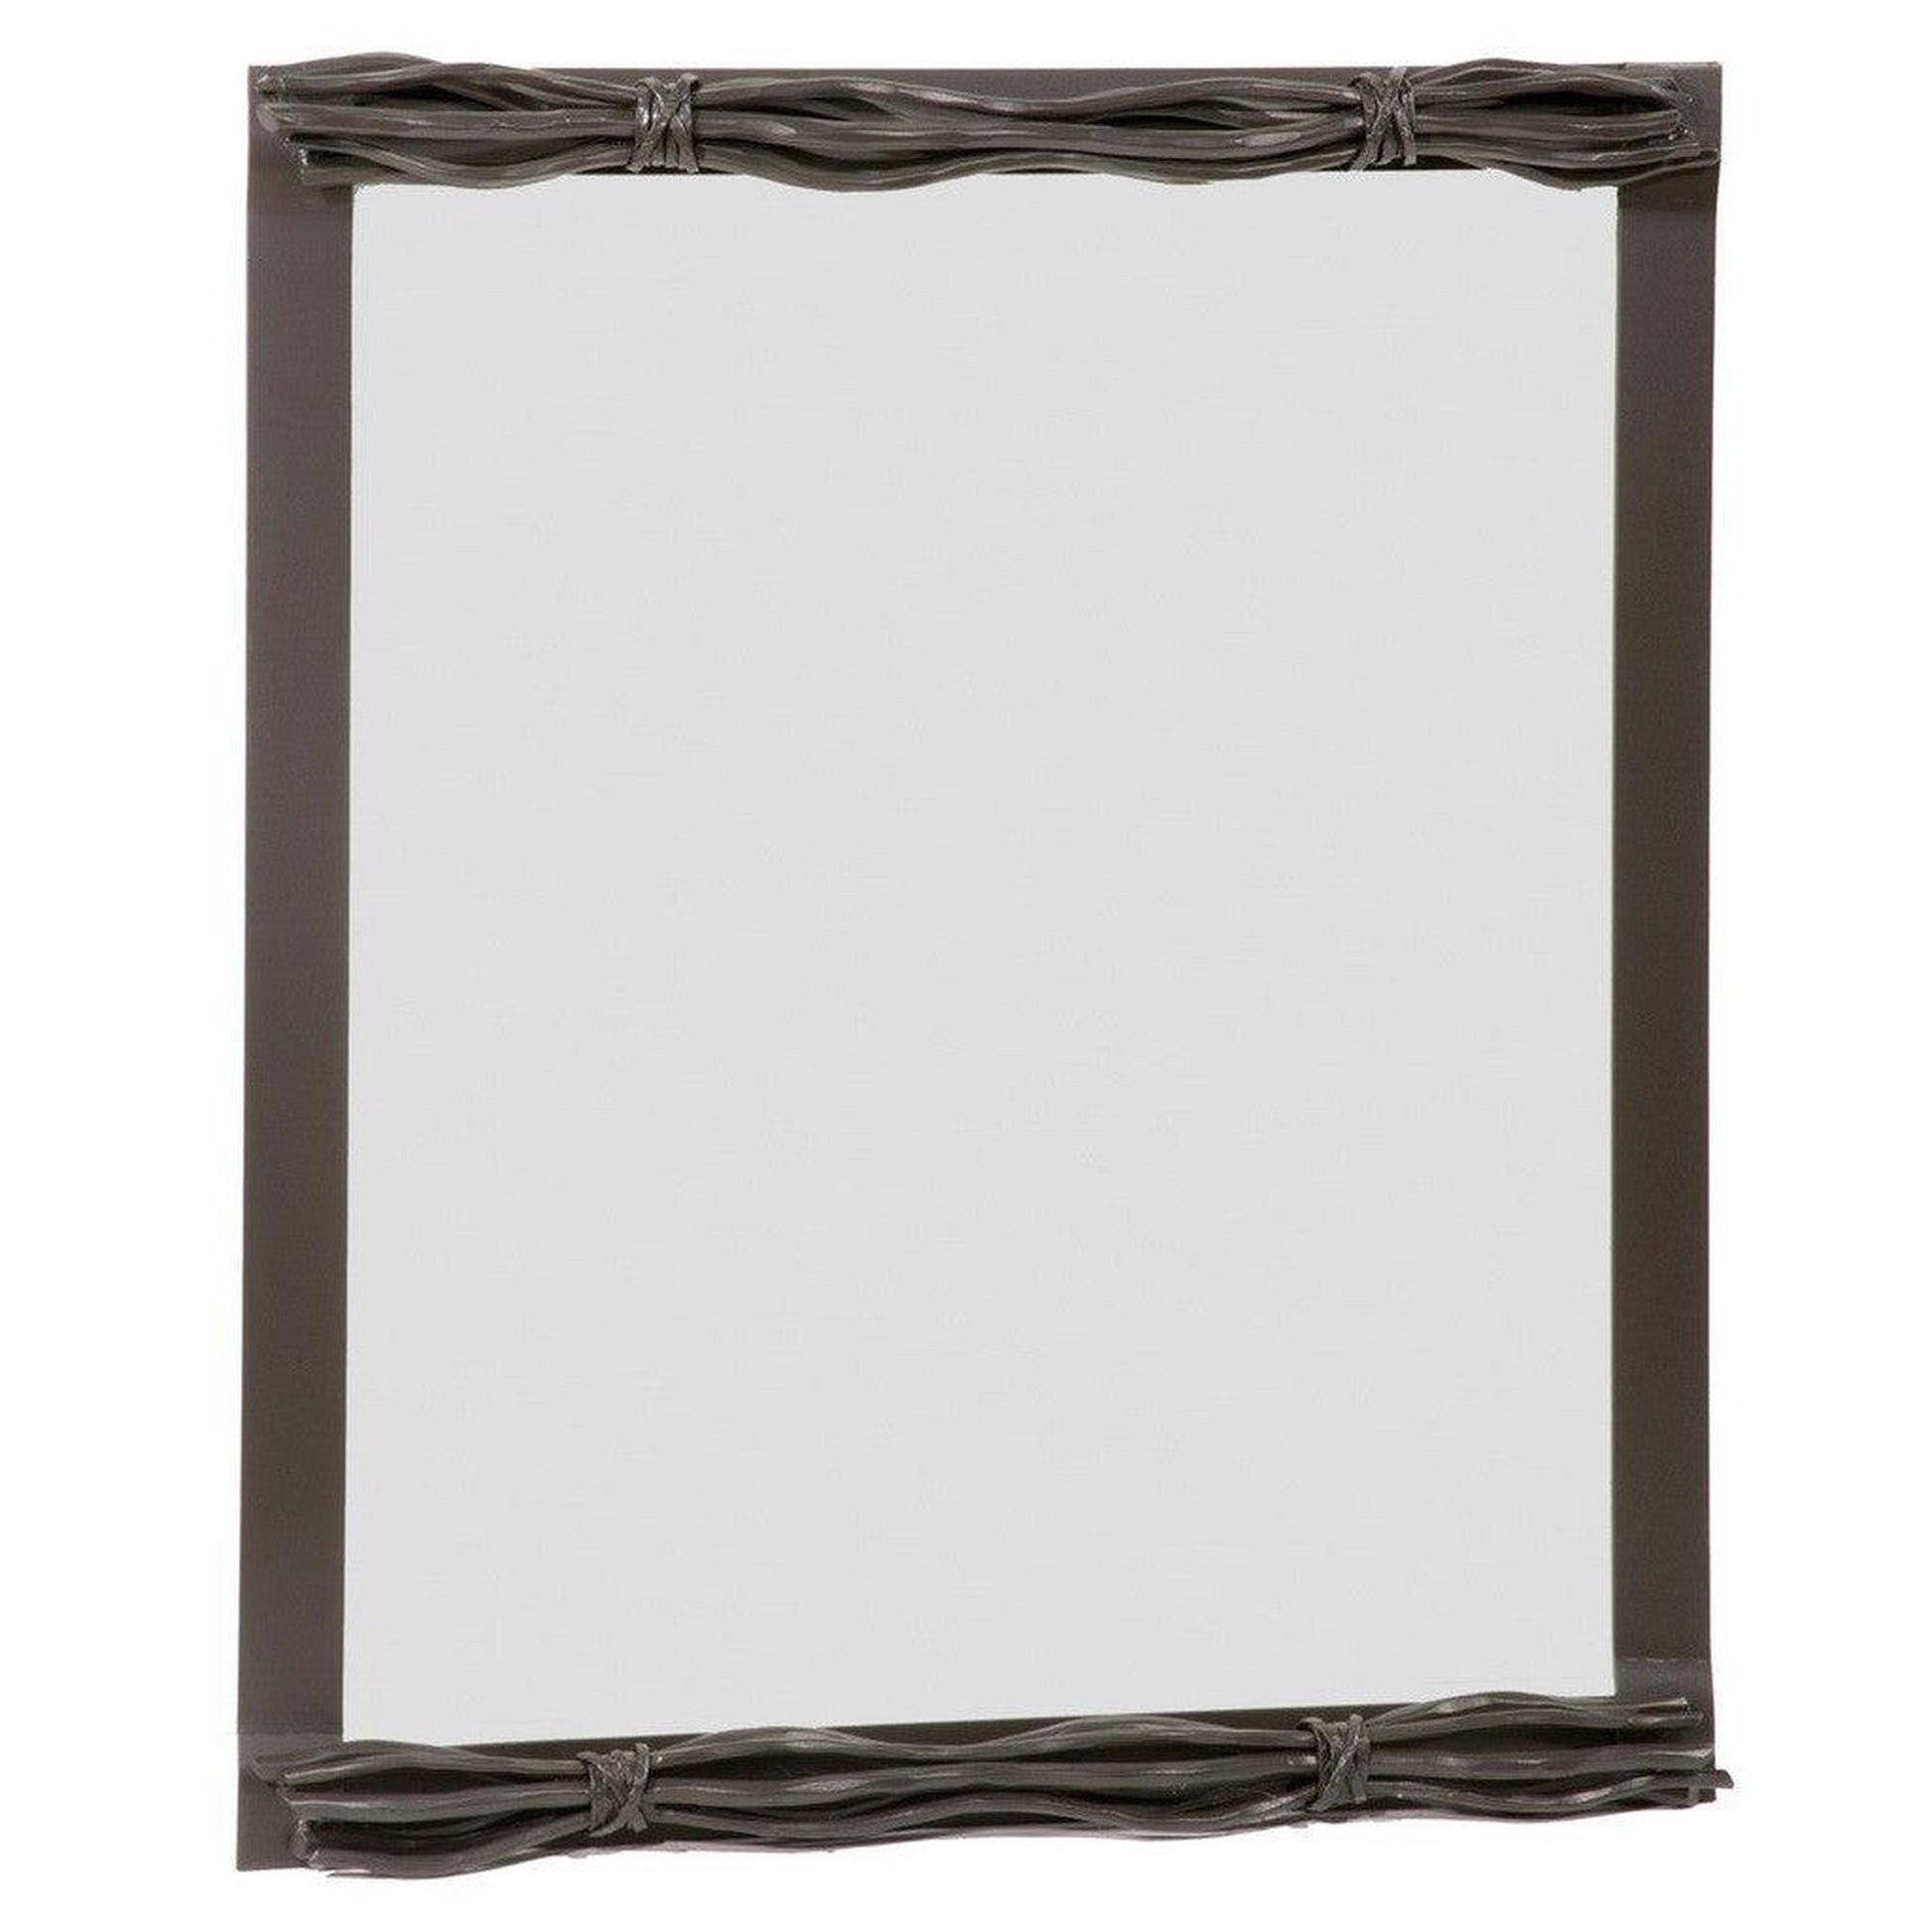 Stone County Ironworks Rush 21" x 26" Small Satin Black Iron Wall Mirror With Gold Iron Accent